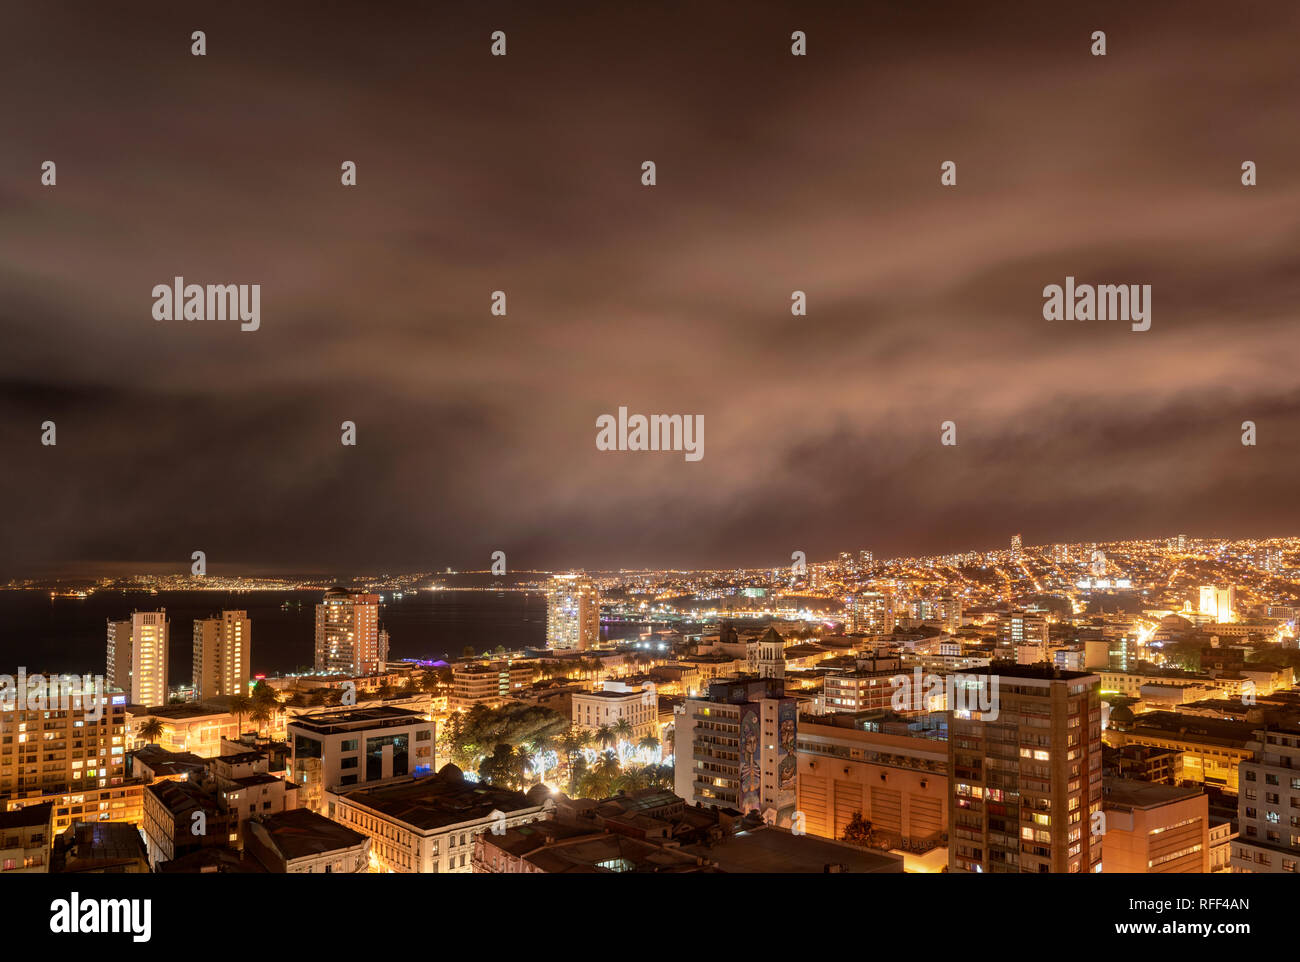 View of Valparaiso city, Chile, by night. Stock Photo